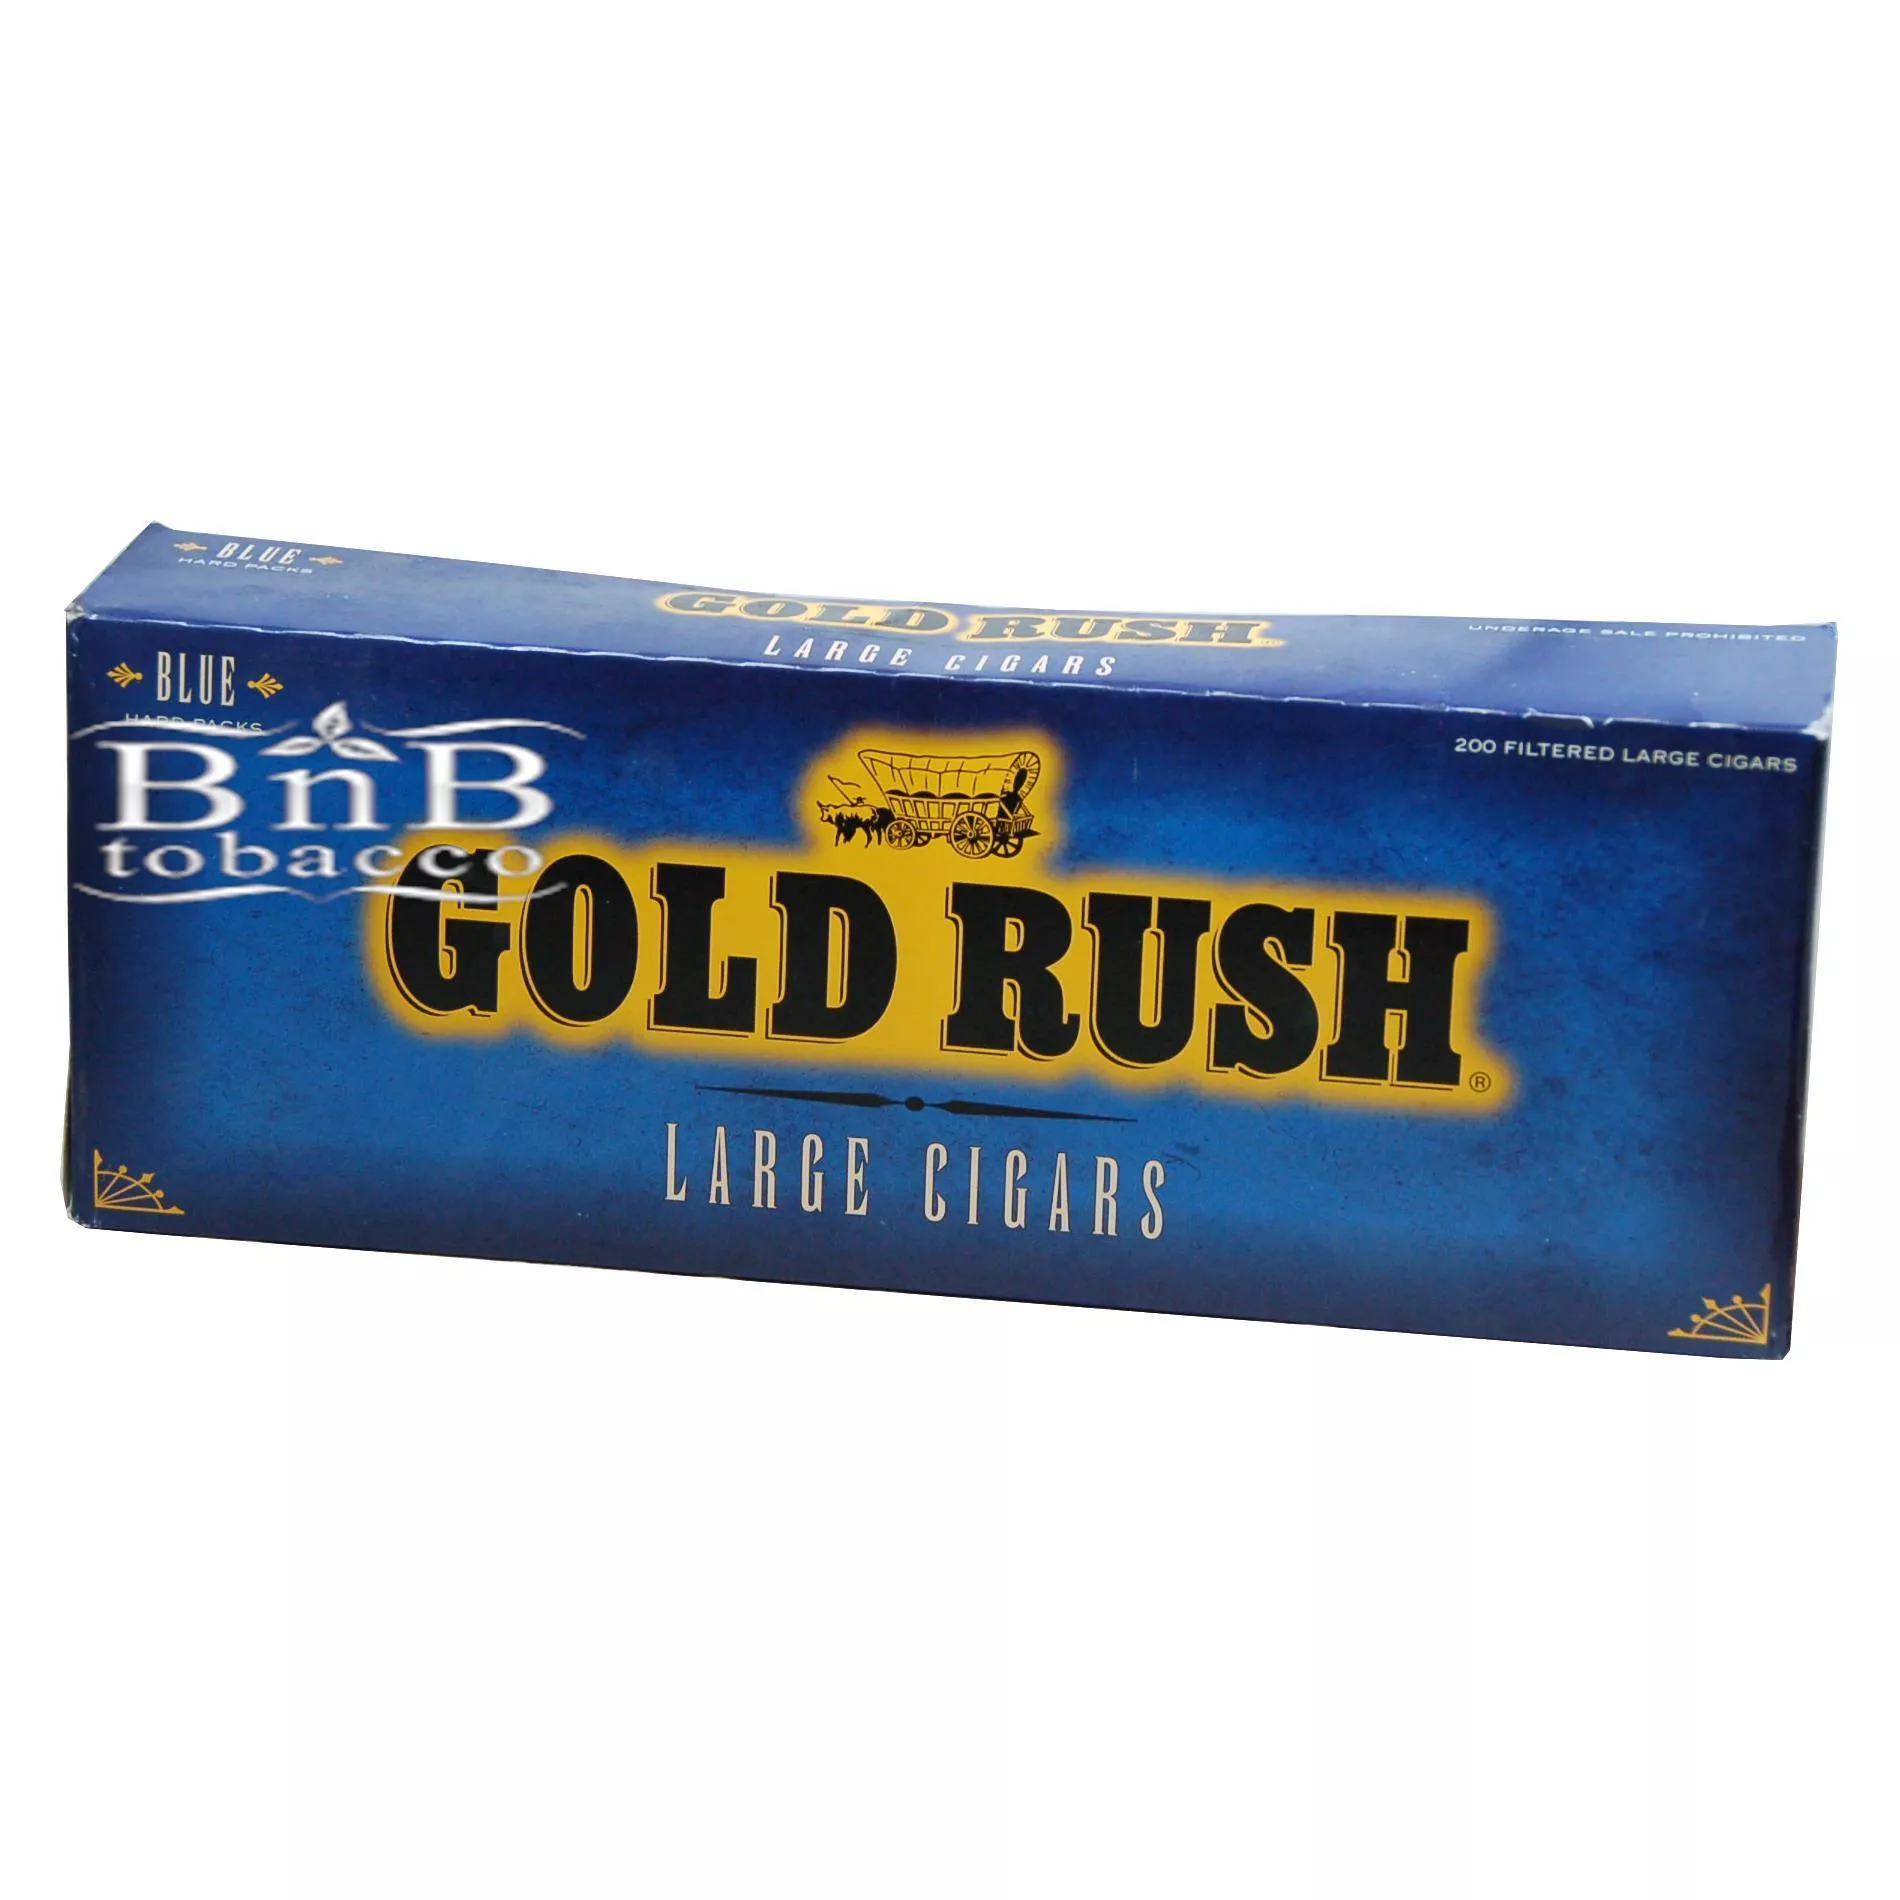 Gold Rush little cigars have special advantages